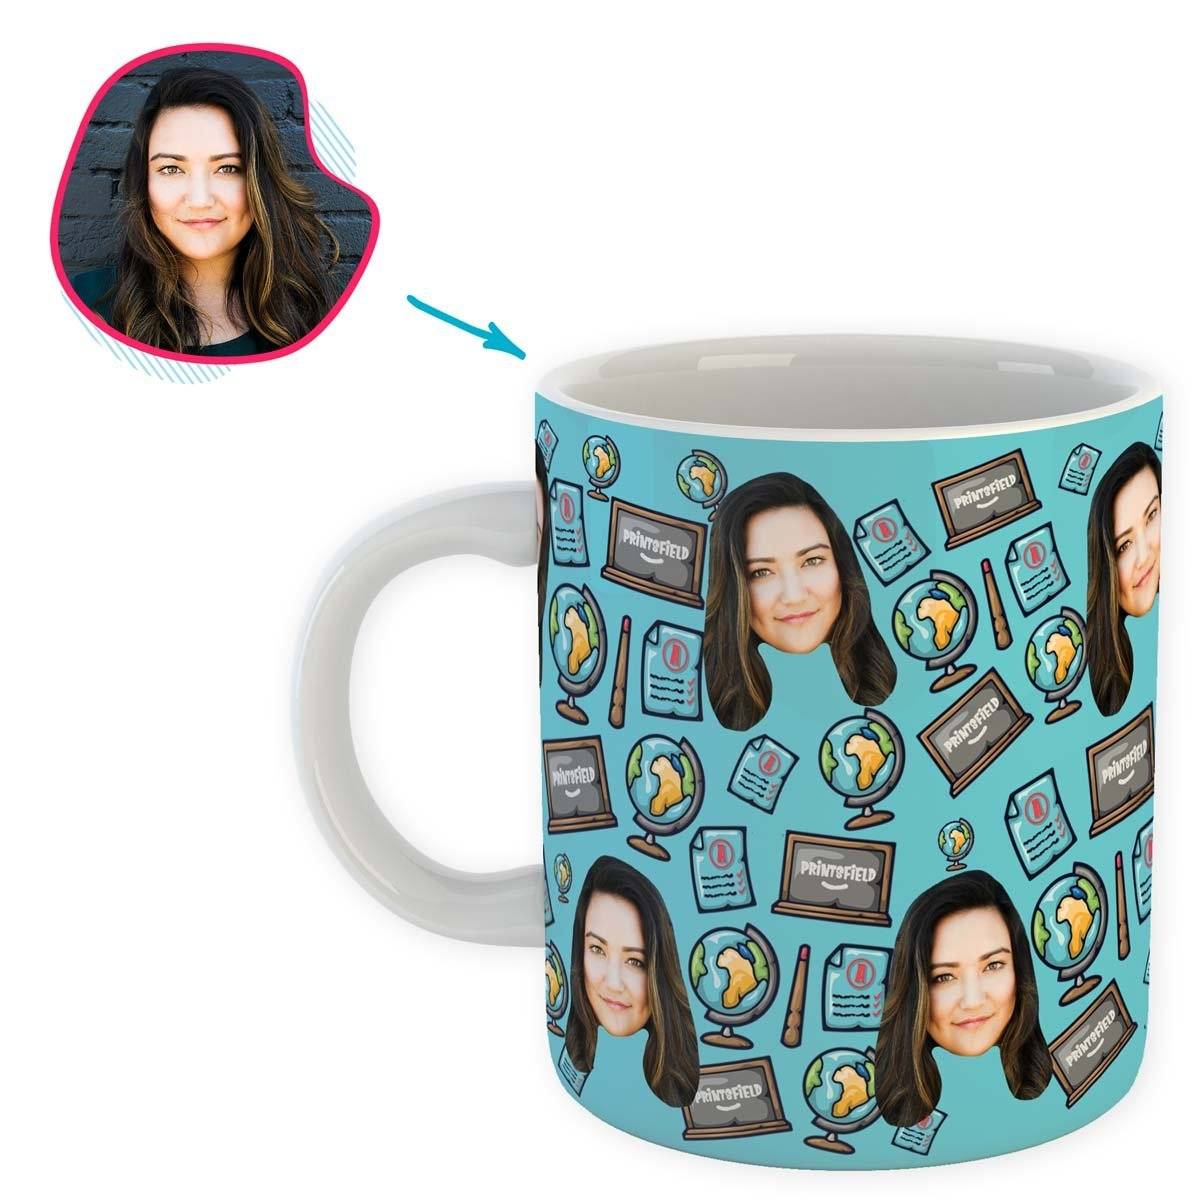 Blue Teacher personalized mug with photo of face printed on it